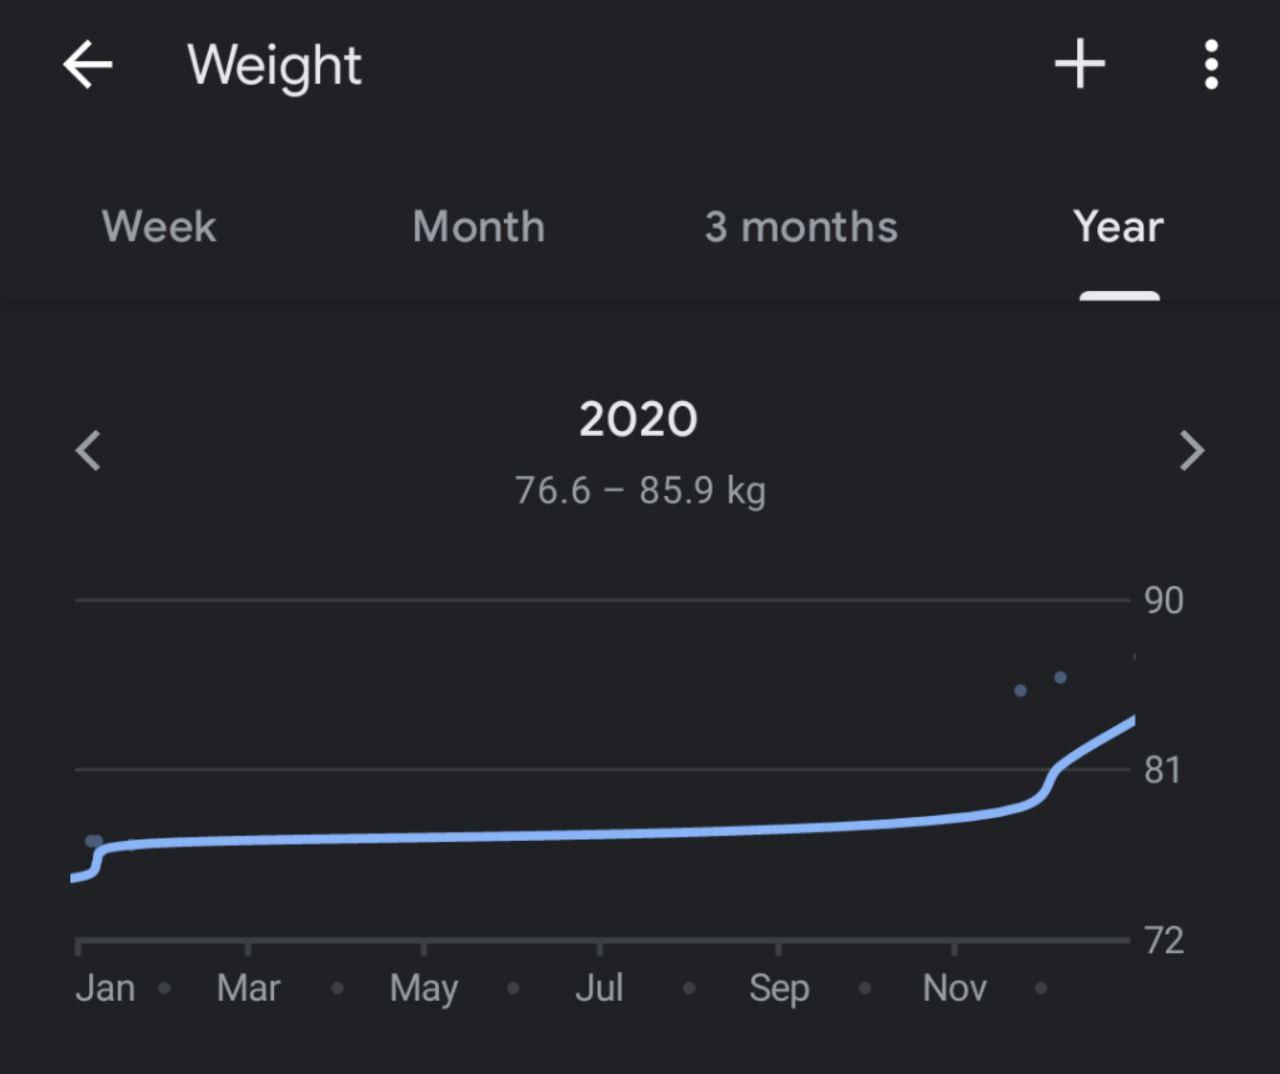 A chart showing how my weight changed across the year.